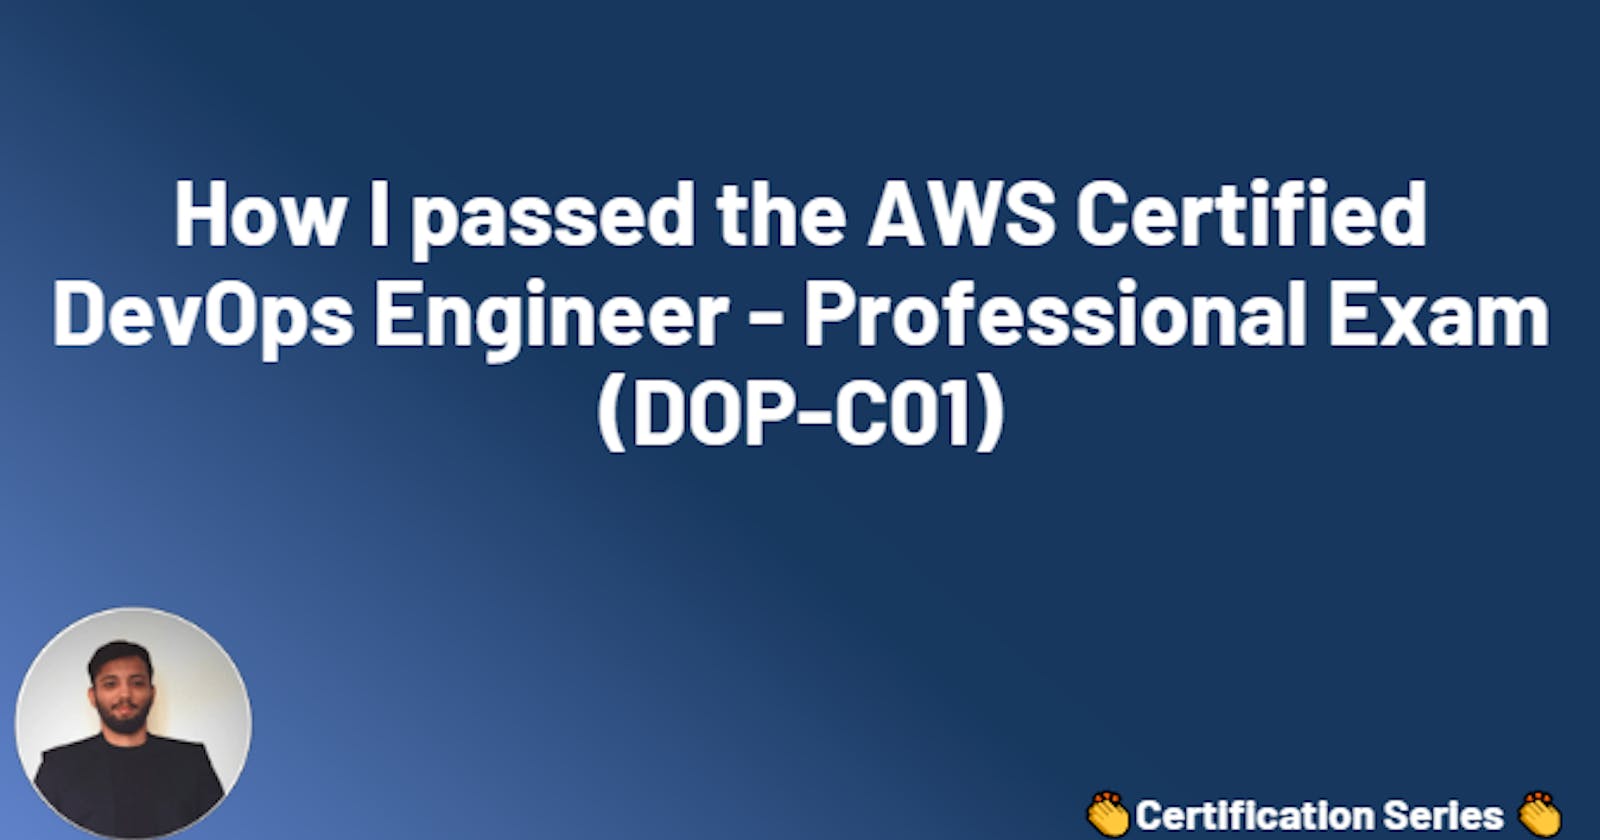 How I passed the AWS Certified DevOps Engineer - Professional Exam (DOP-C01)